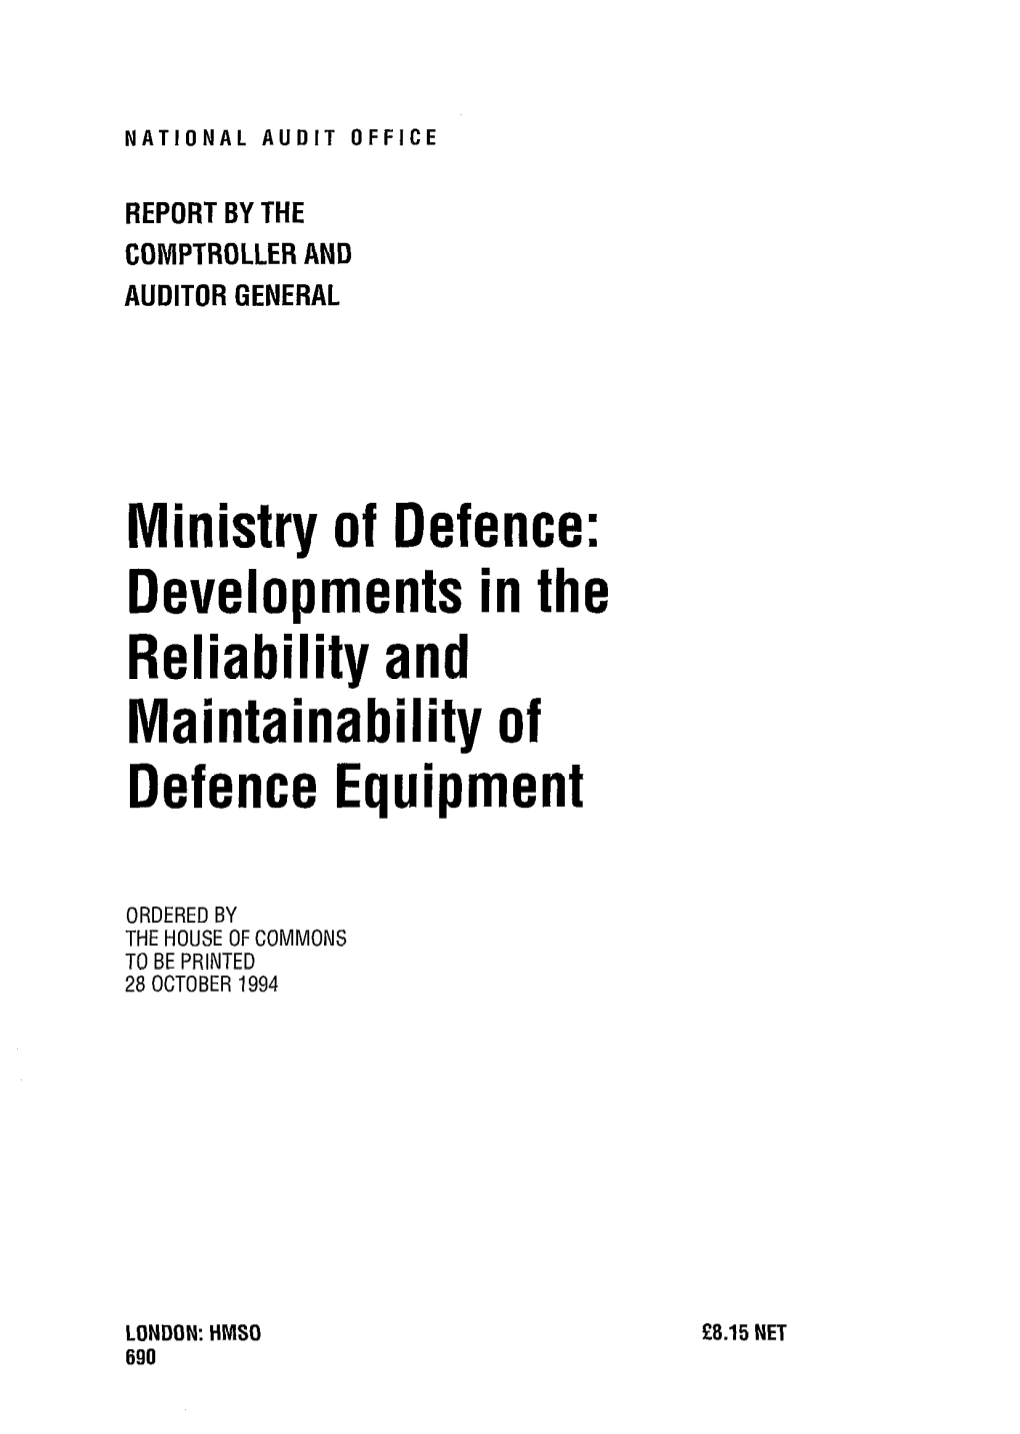 DEVELOPMENTS in the RELIABILITY and MAINTAINABILITY of DEFENCE EQUIPMENT Report